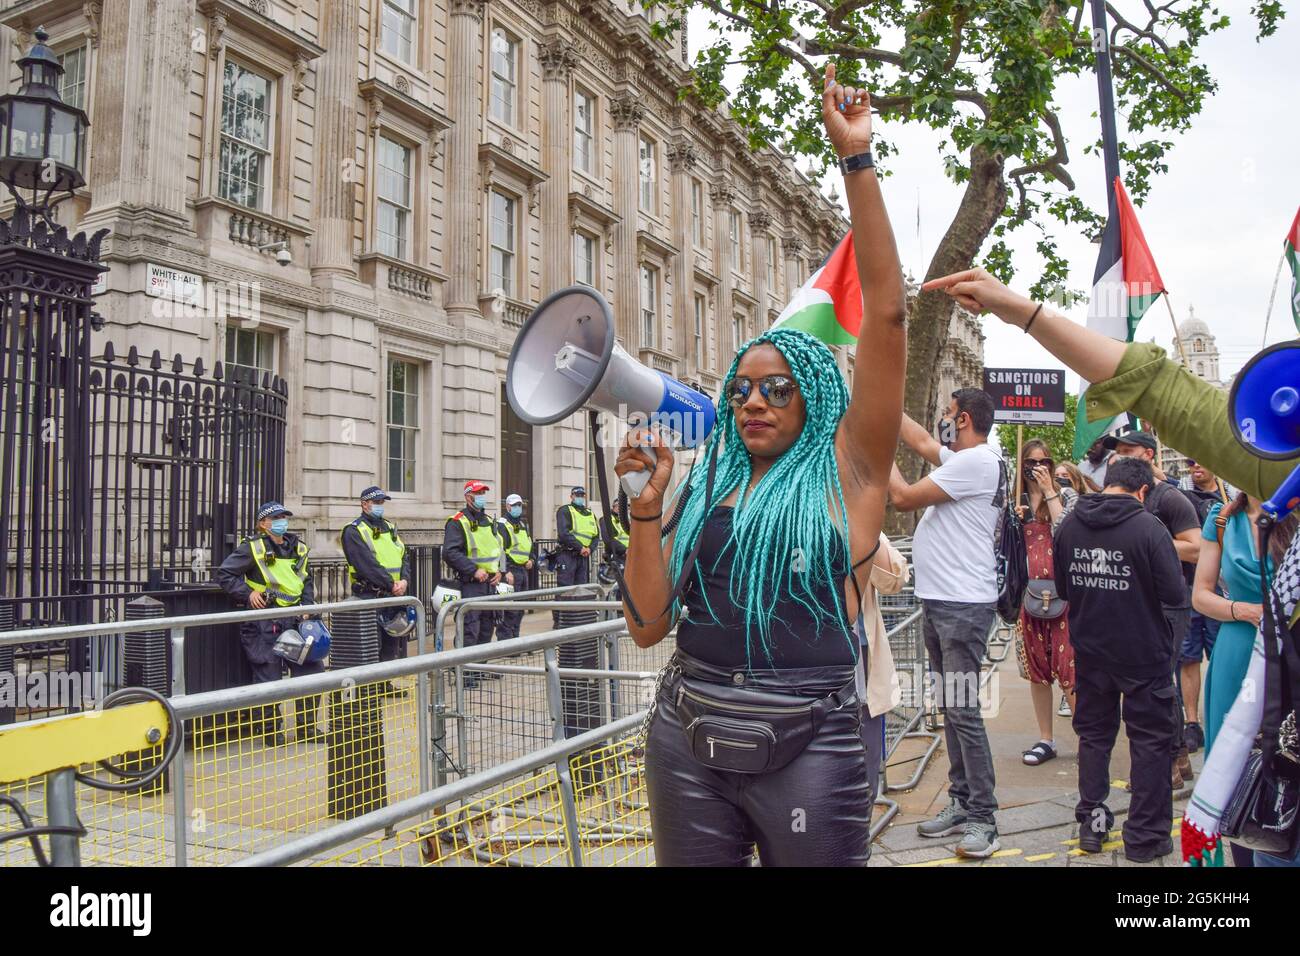 London, United Kingdom. 26th June 2021. Protesters outside Downing Street. Several protests took place in the capital, as pro-Palestine, Black Lives Matter, Kill The Bill, Extinction Rebellion, anti-Tory demonstrators, and various other groups marched through Central London. Stock Photo